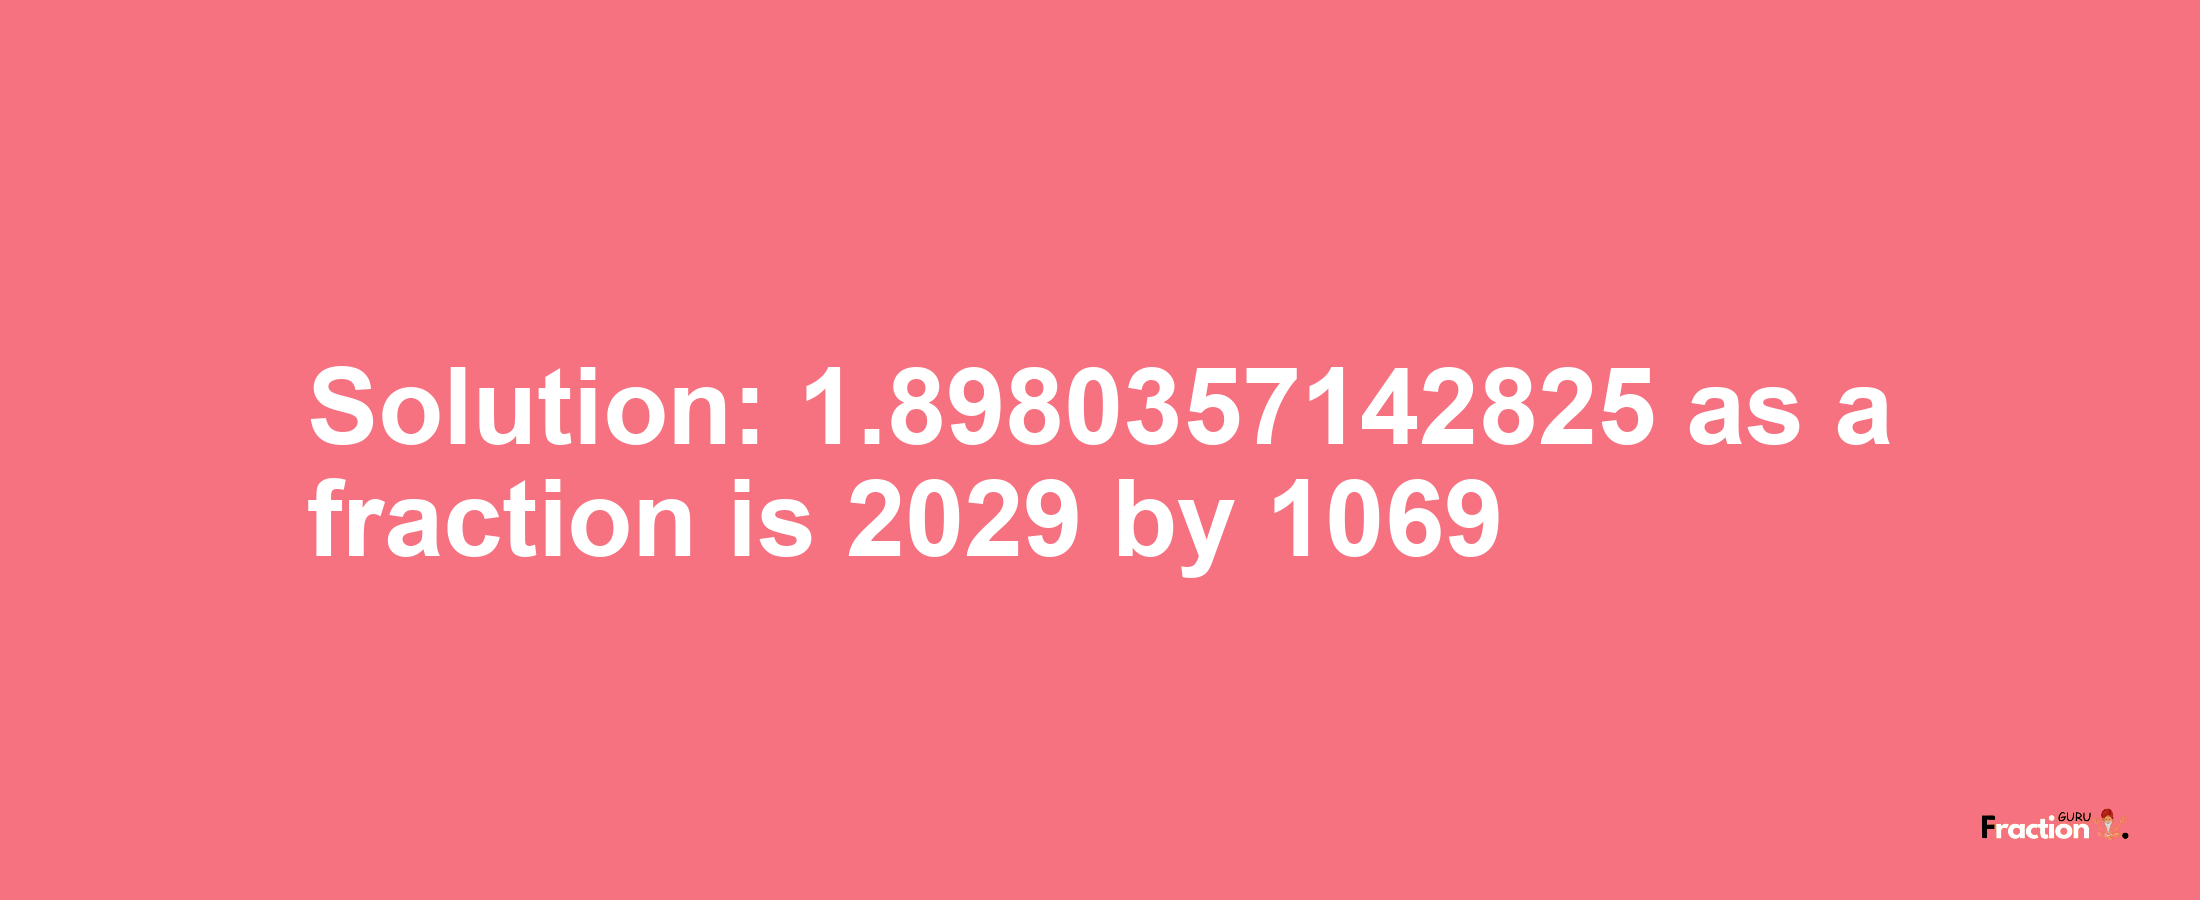 Solution:1.8980357142825 as a fraction is 2029/1069